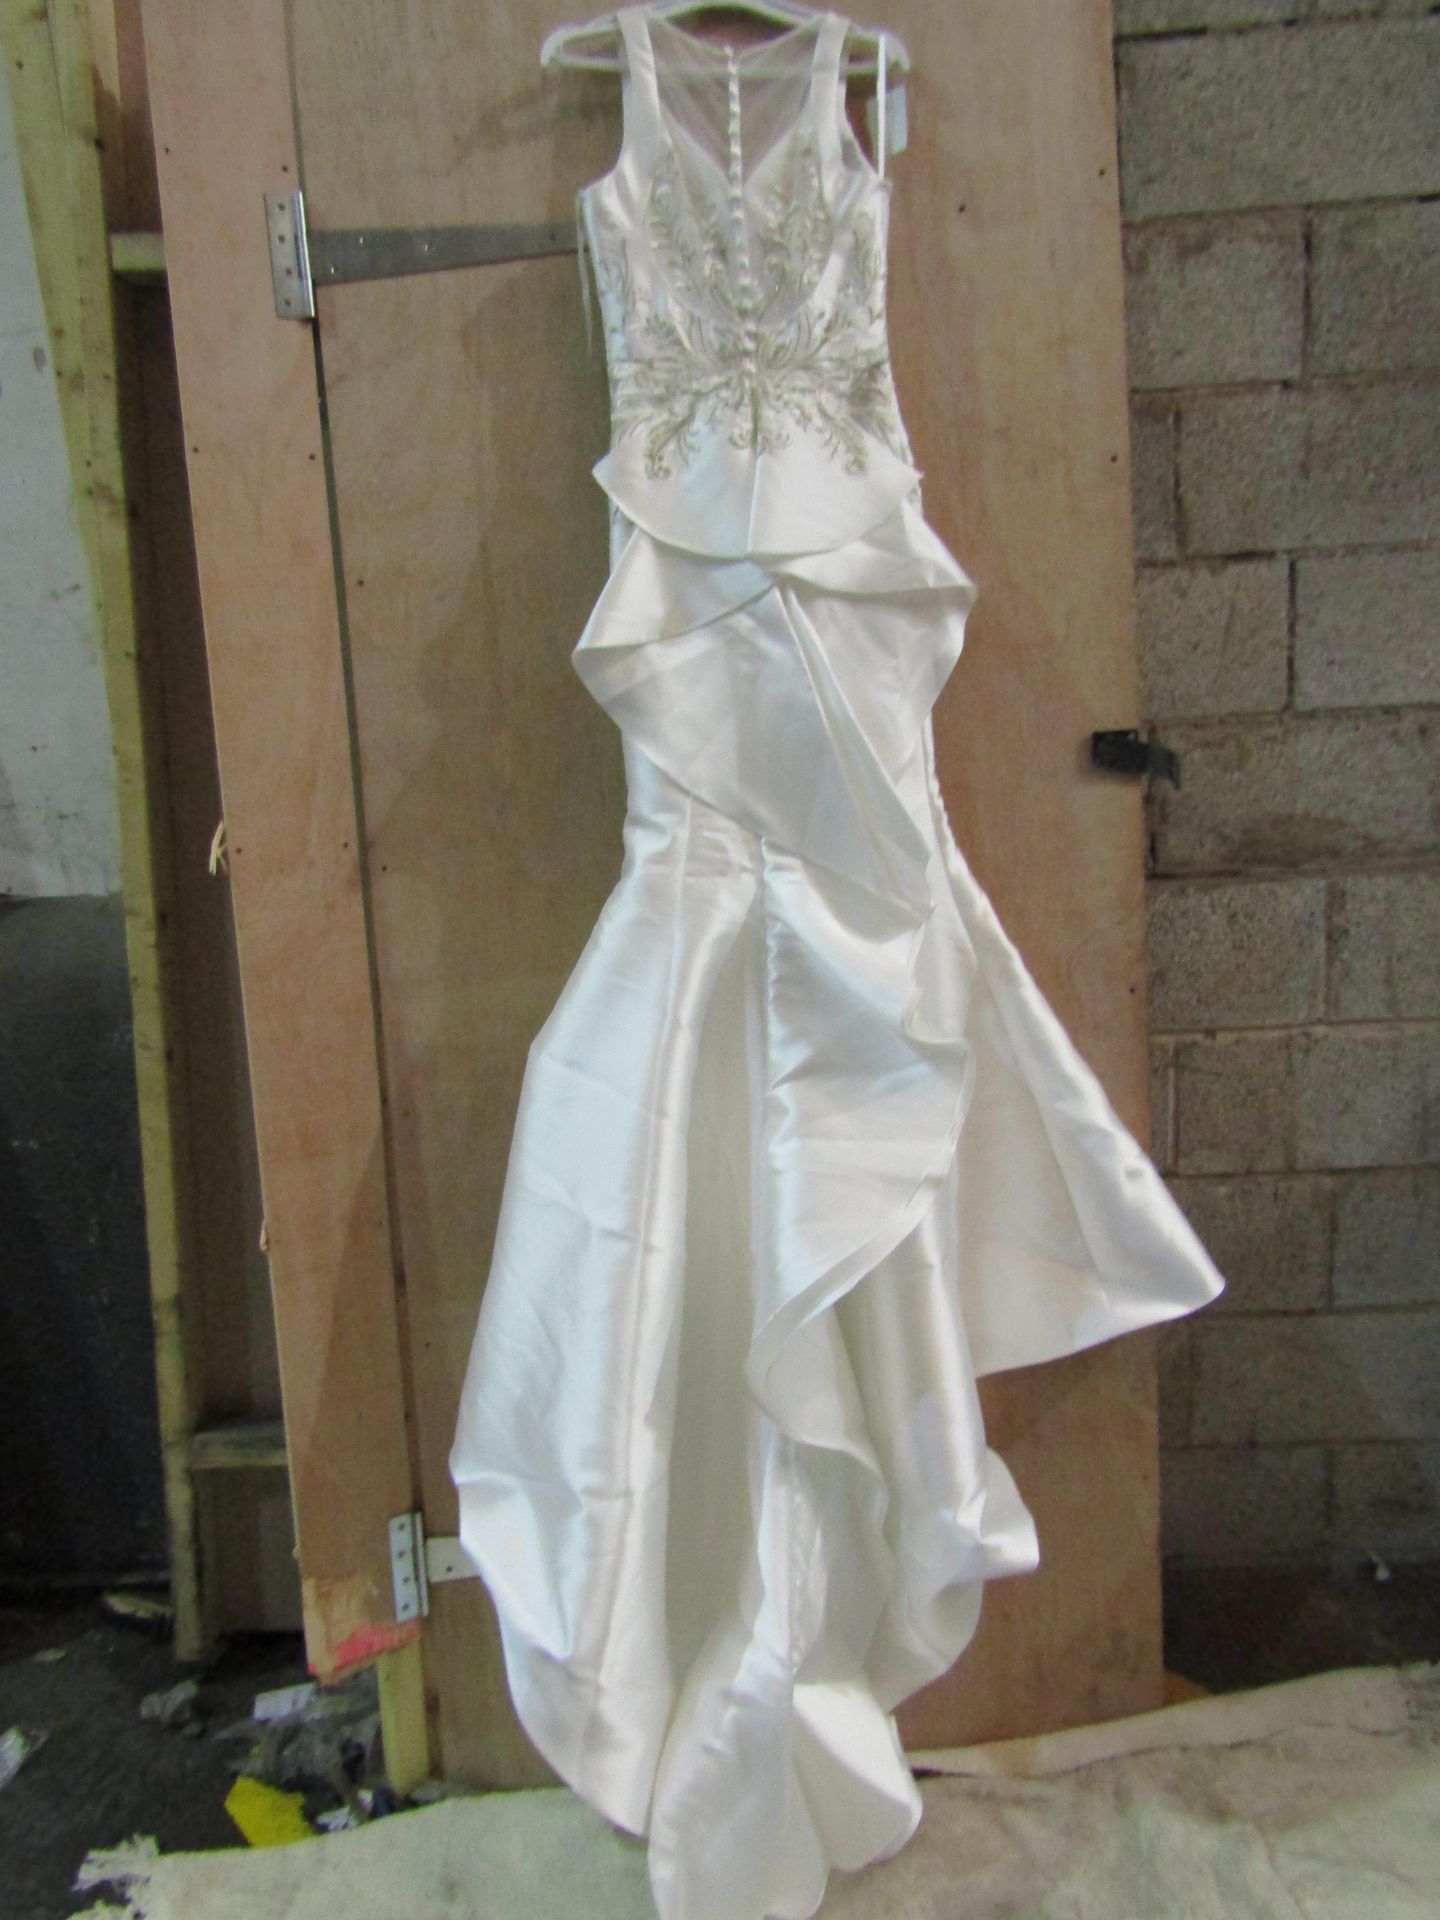 Approx 500 pieces of wedding shop stock to include wedding dresses, mother of the bride, dresses, - Image 83 of 108